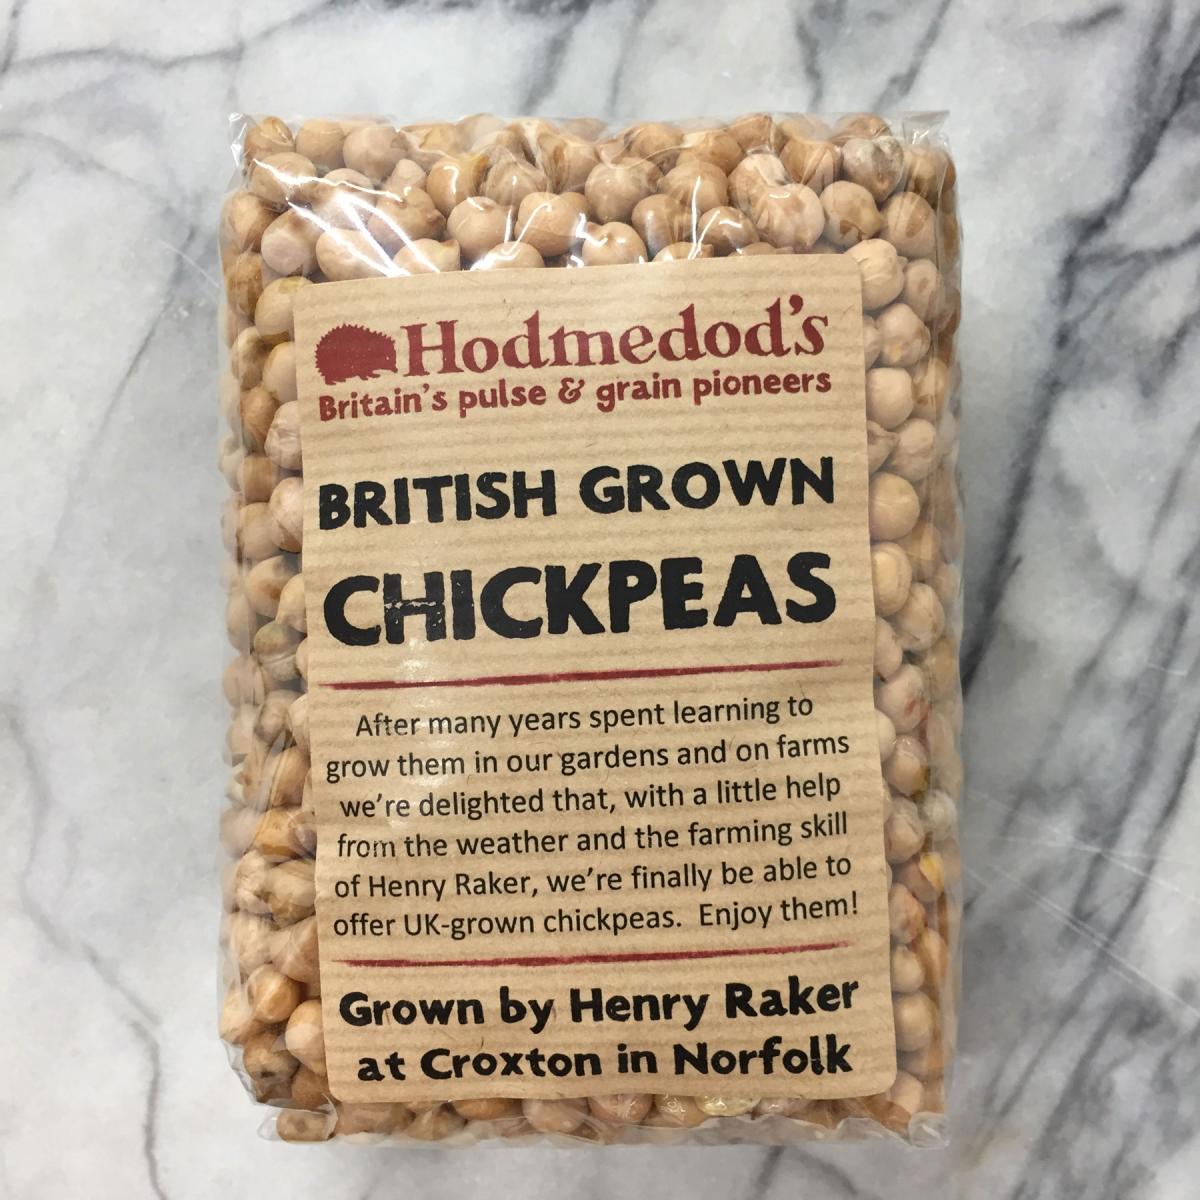 A pack of 2019 British chickpeas.  The Hodmedod’s logo, a hedgehog (which is an East Anglian dialect word meaning ‘curled up’, sometimes applied to hedgehogs), with the strap line ‘British pulse & grain pioneers’ all in brick red, and the description “British Grown Chickpeas.  After many years spent learning to grown them in our gardens and on farms we’re delighted that, with a little help from the weather and the farming skill of Henry Rakers, we’re finally able to offer UK-grown chickpeas.  Enjoy them!  Grown by Henry Raker at Croxton, Norfolk.